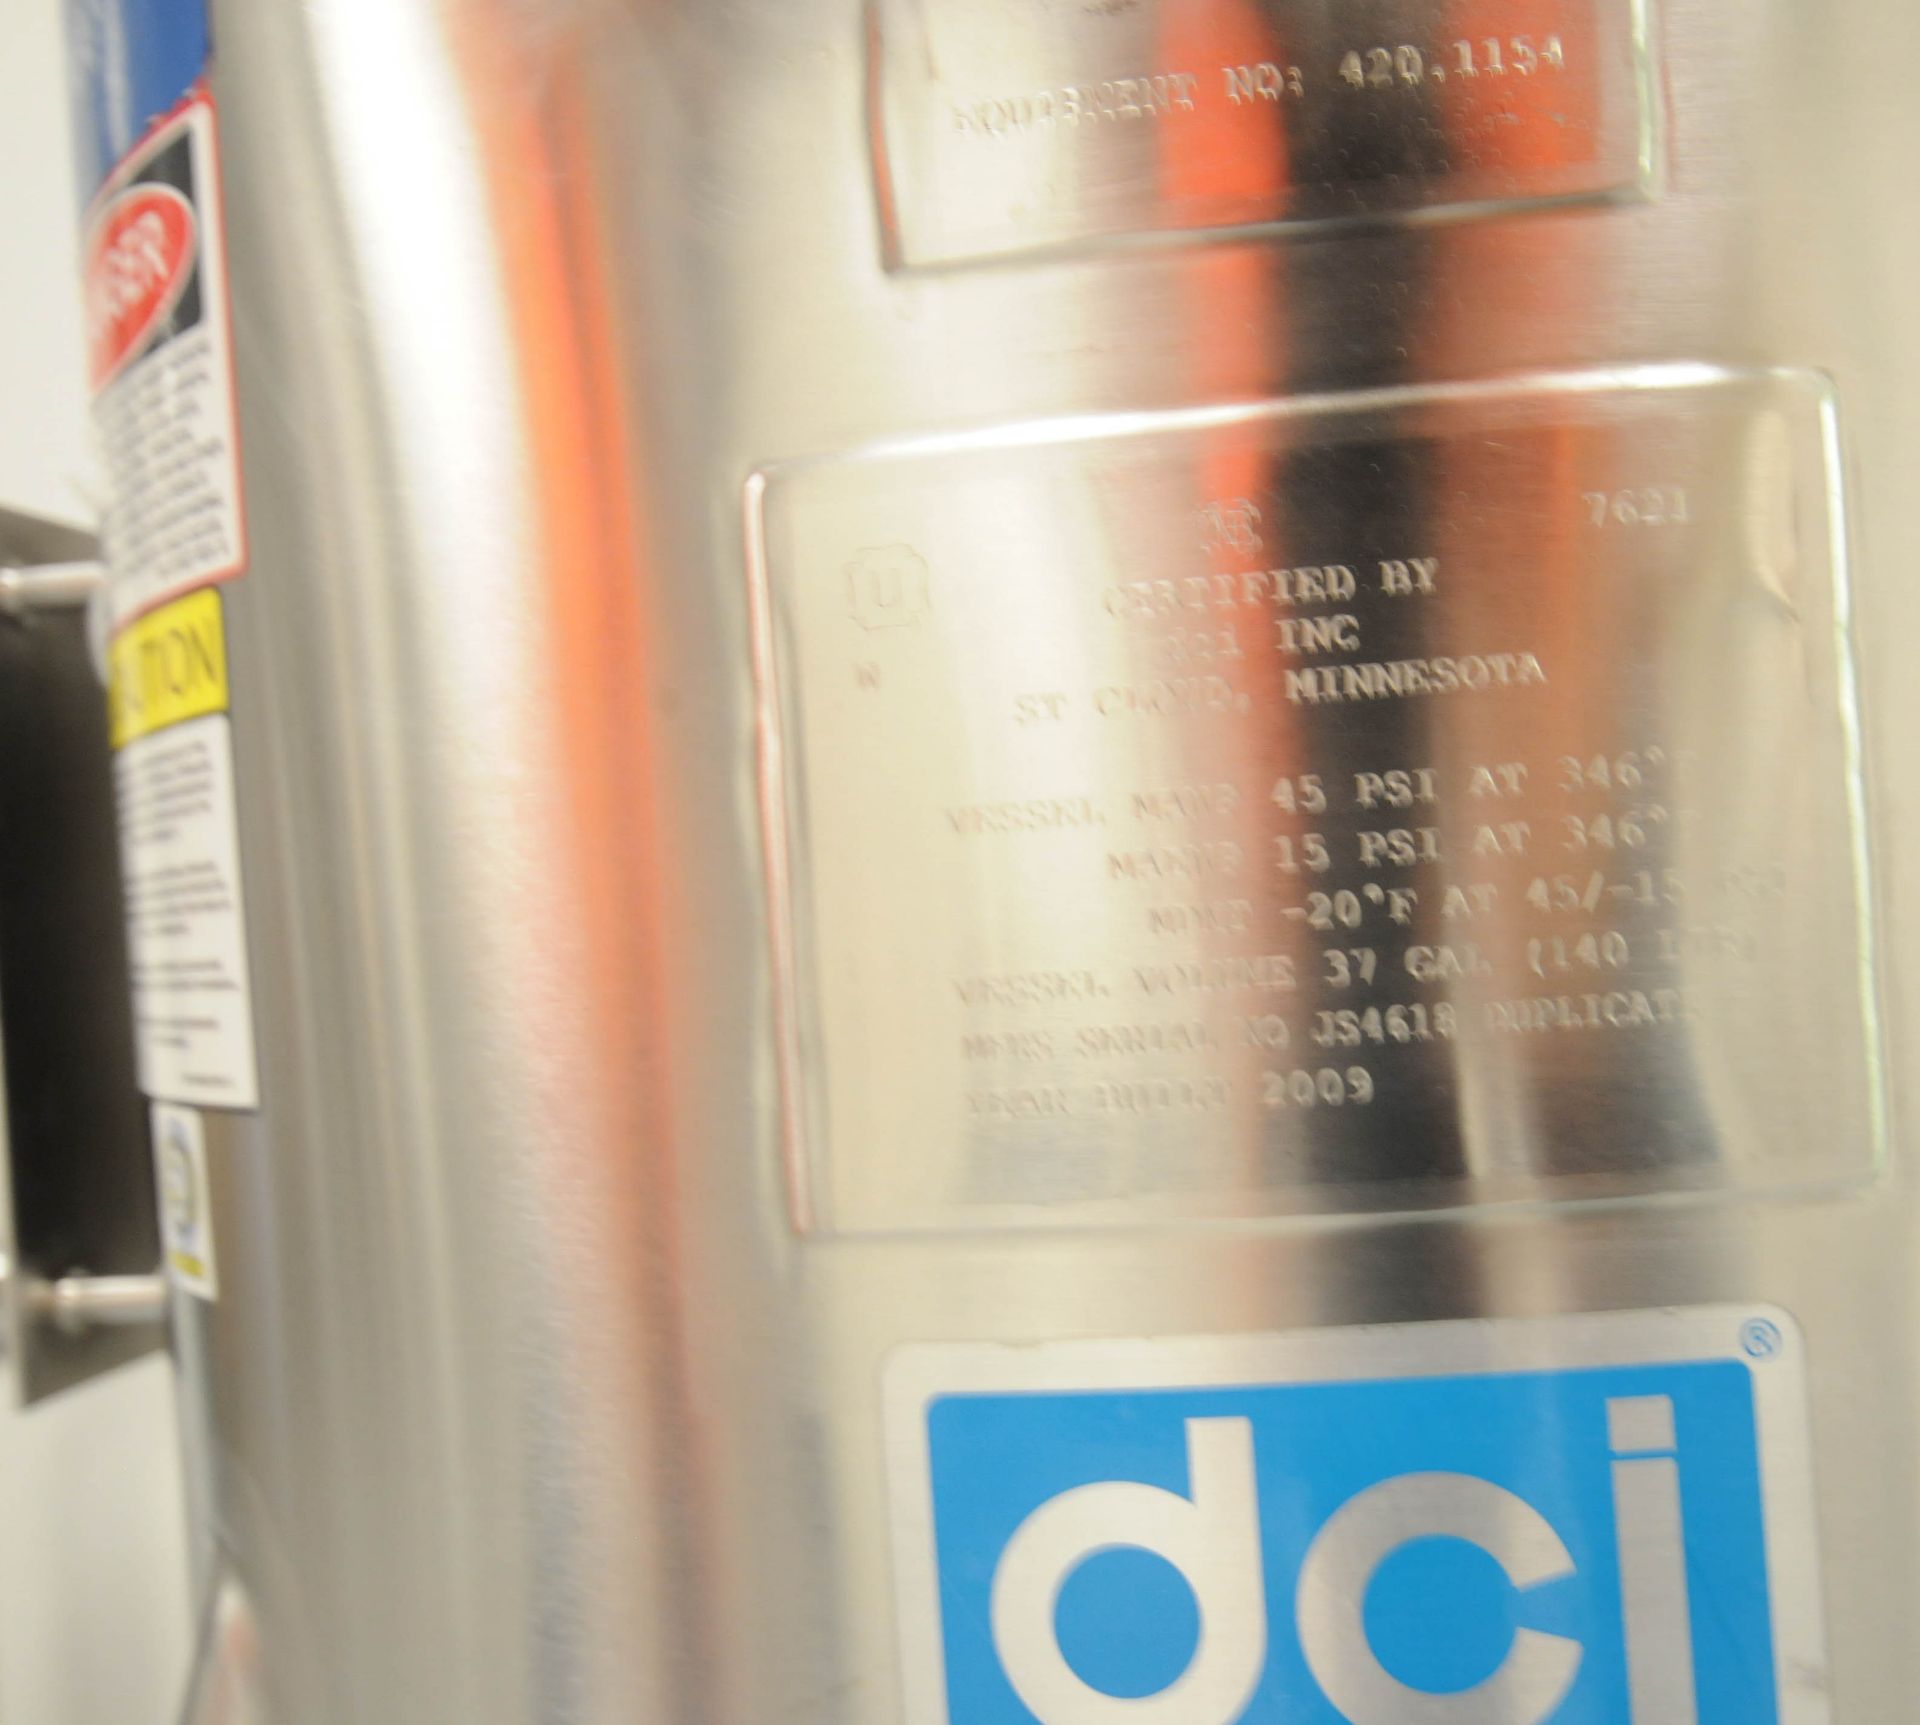 DCI (2009) PORTABLE STAINLESS STEEL TANK WITH 140 LITER CAPACITY, 45 PSIG MAWP @ 346 DEG F, 24" - Image 2 of 5